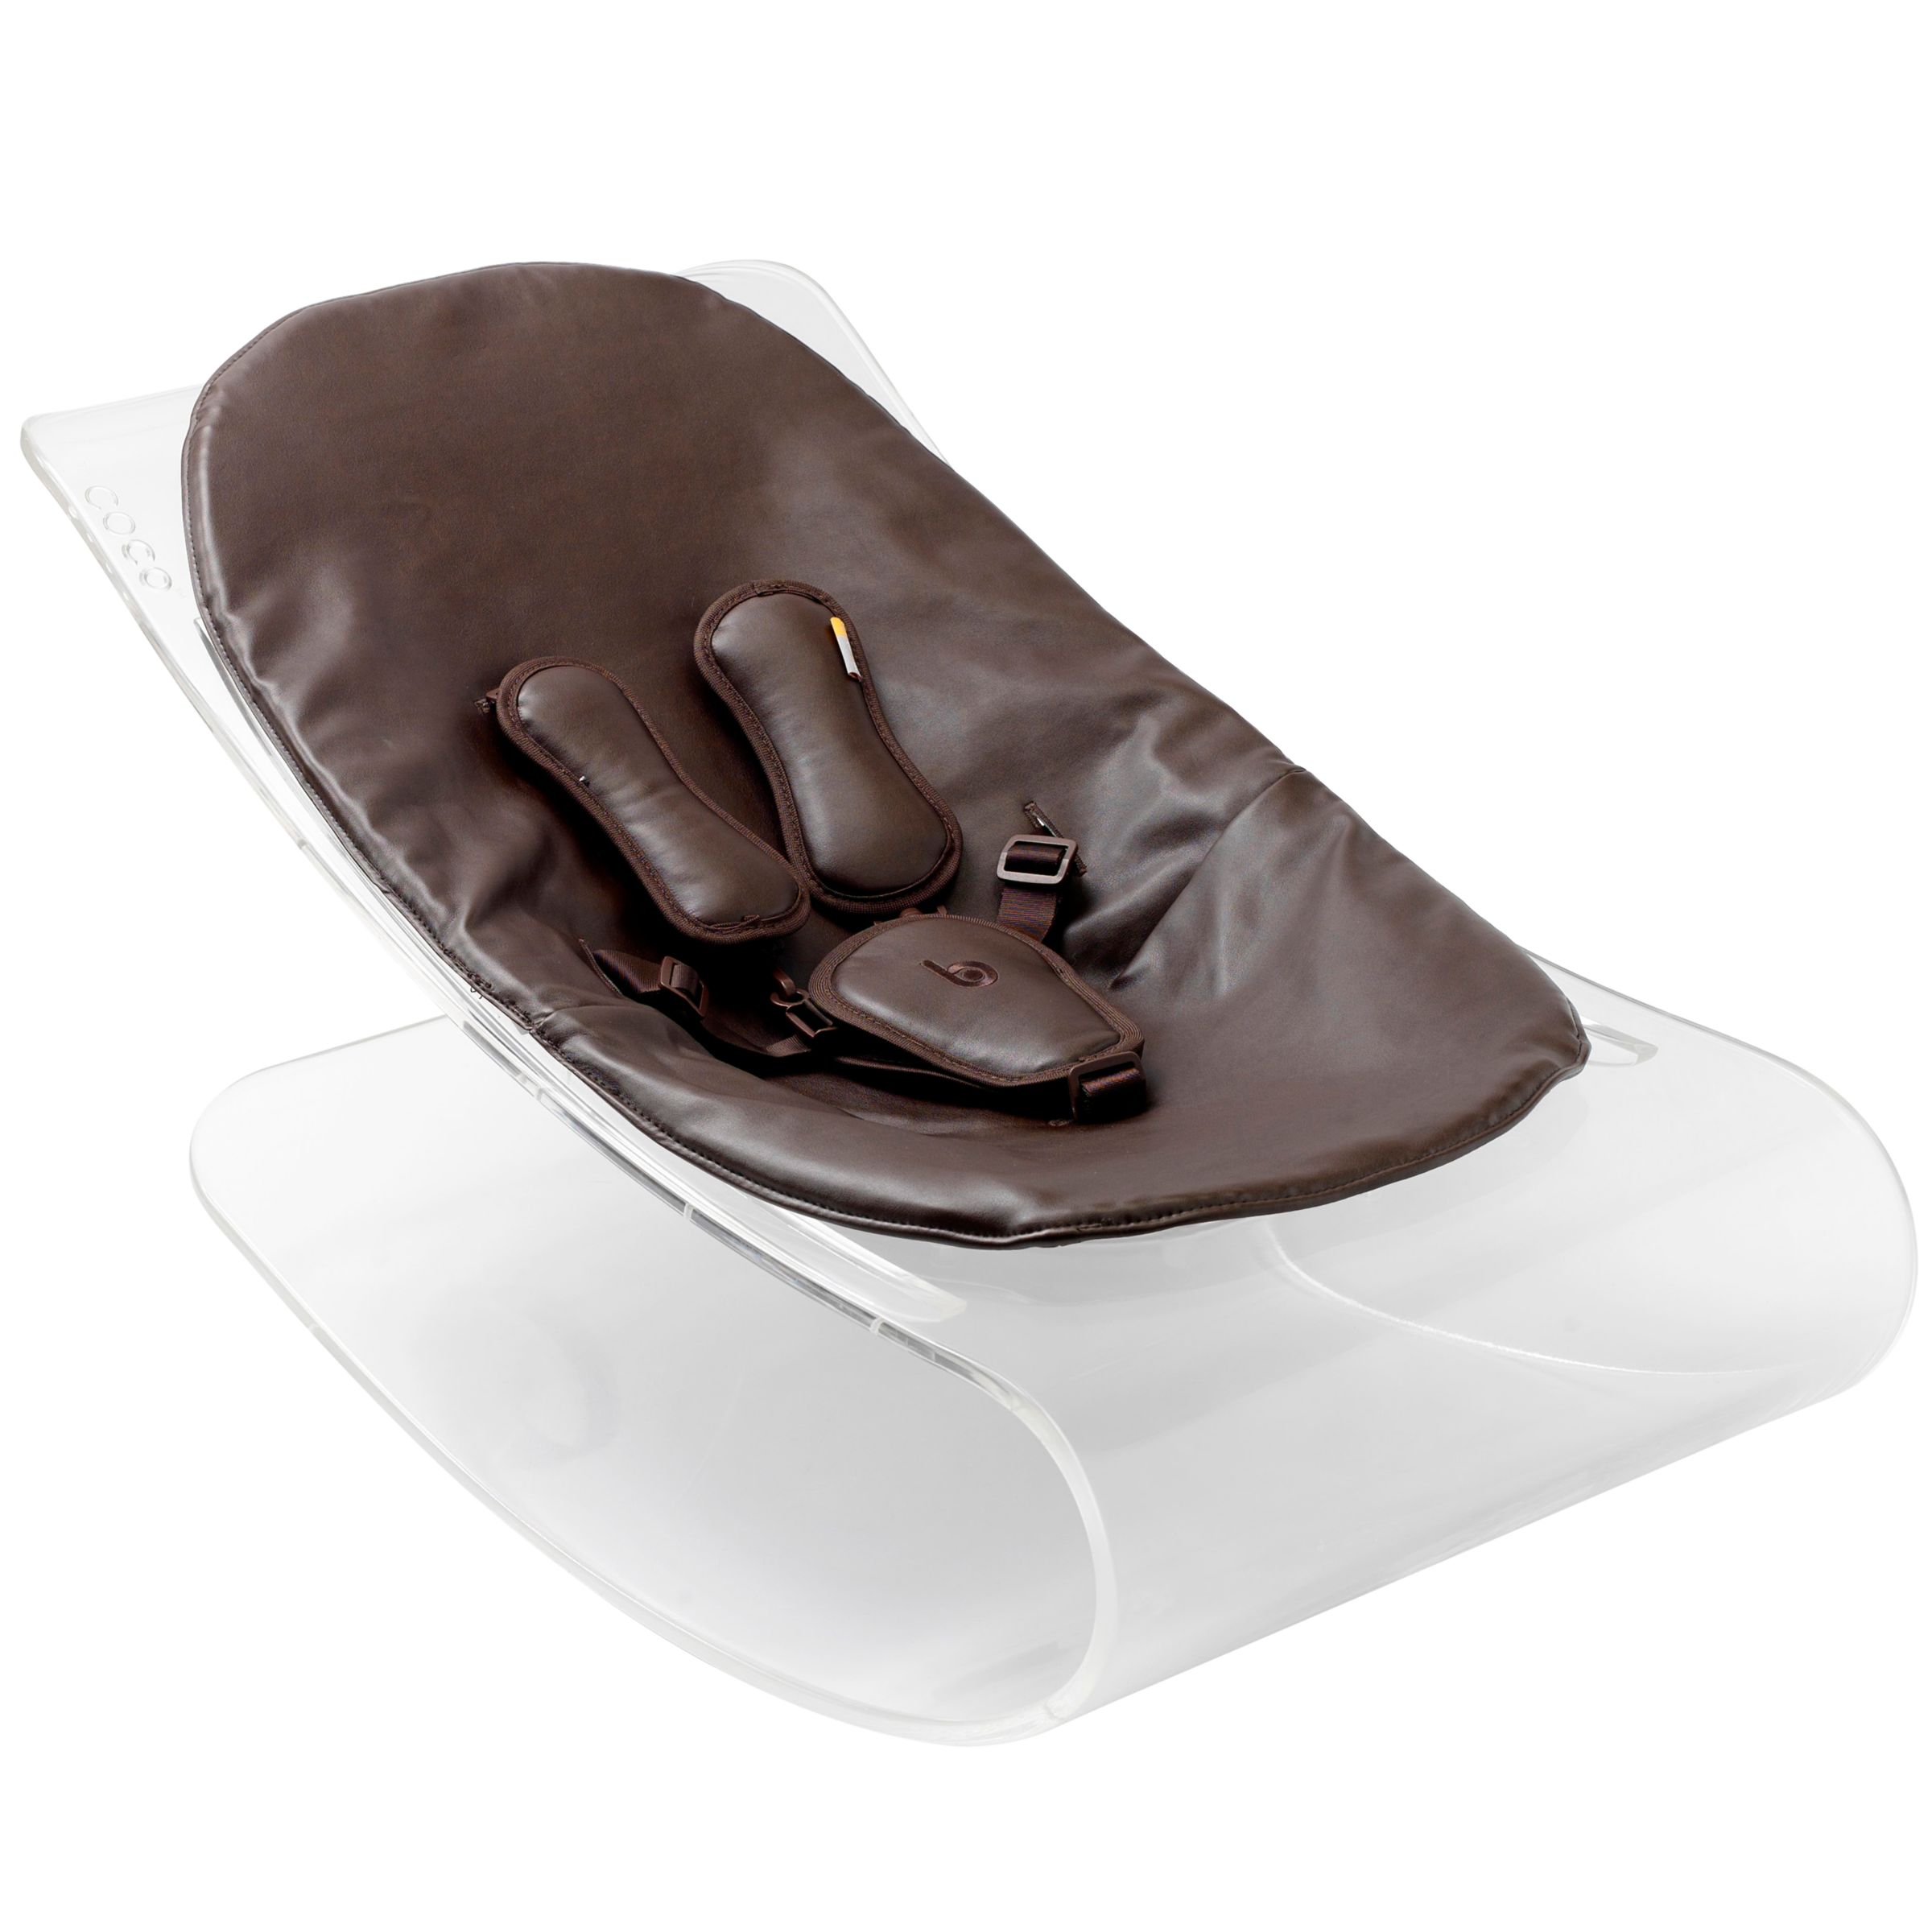 bloom Coco Plexistyle Baby Lounger, Transparent with Henna Brown at John Lewis